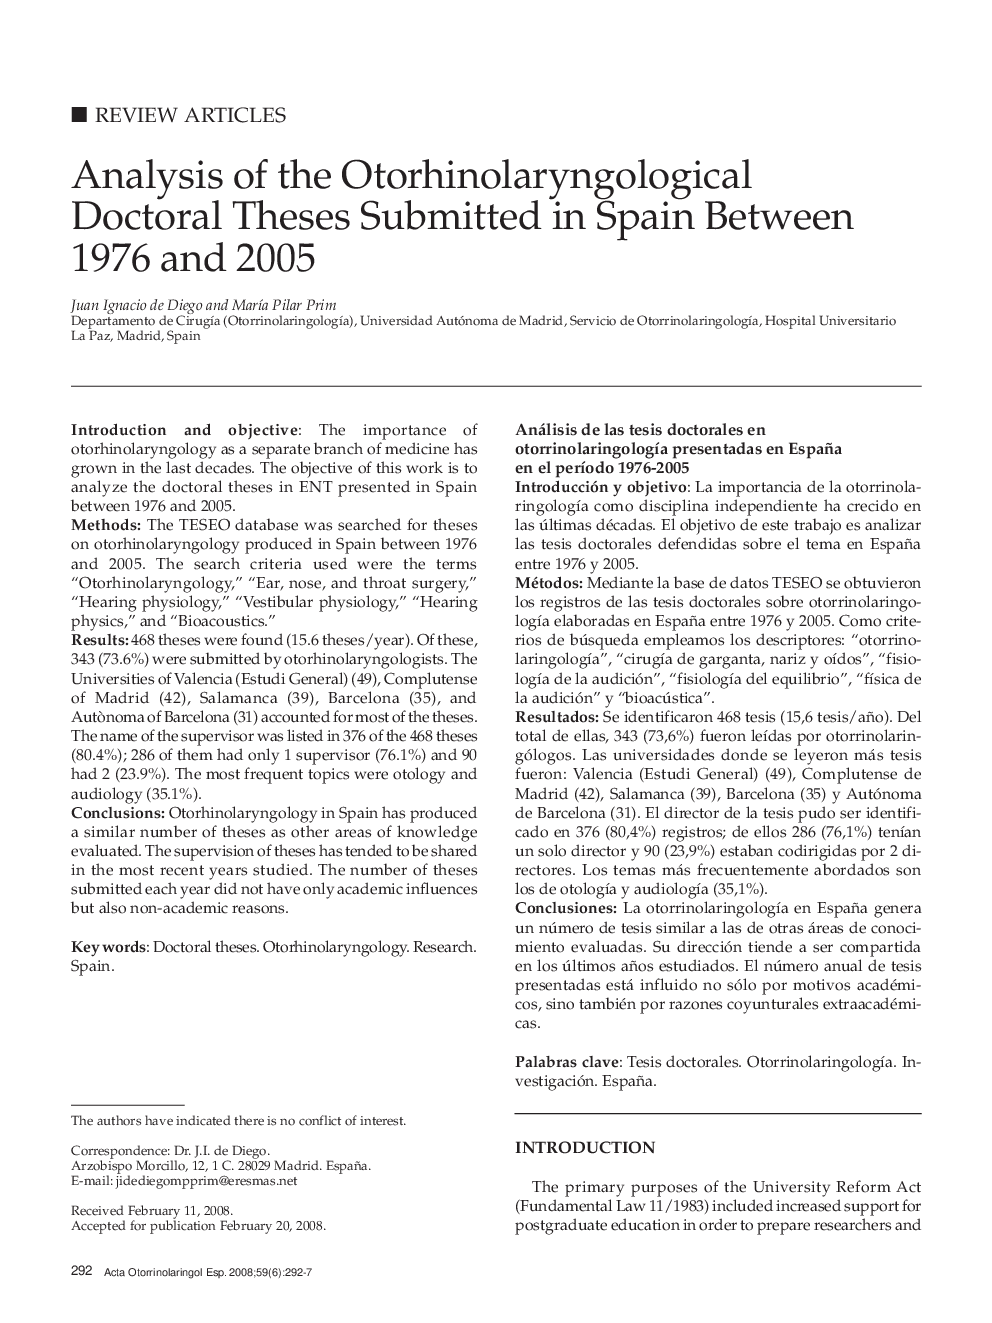 Analysis of the Otorhinolaryngological Doctoral Theses Submitted in Spain Between 1976 and 2005